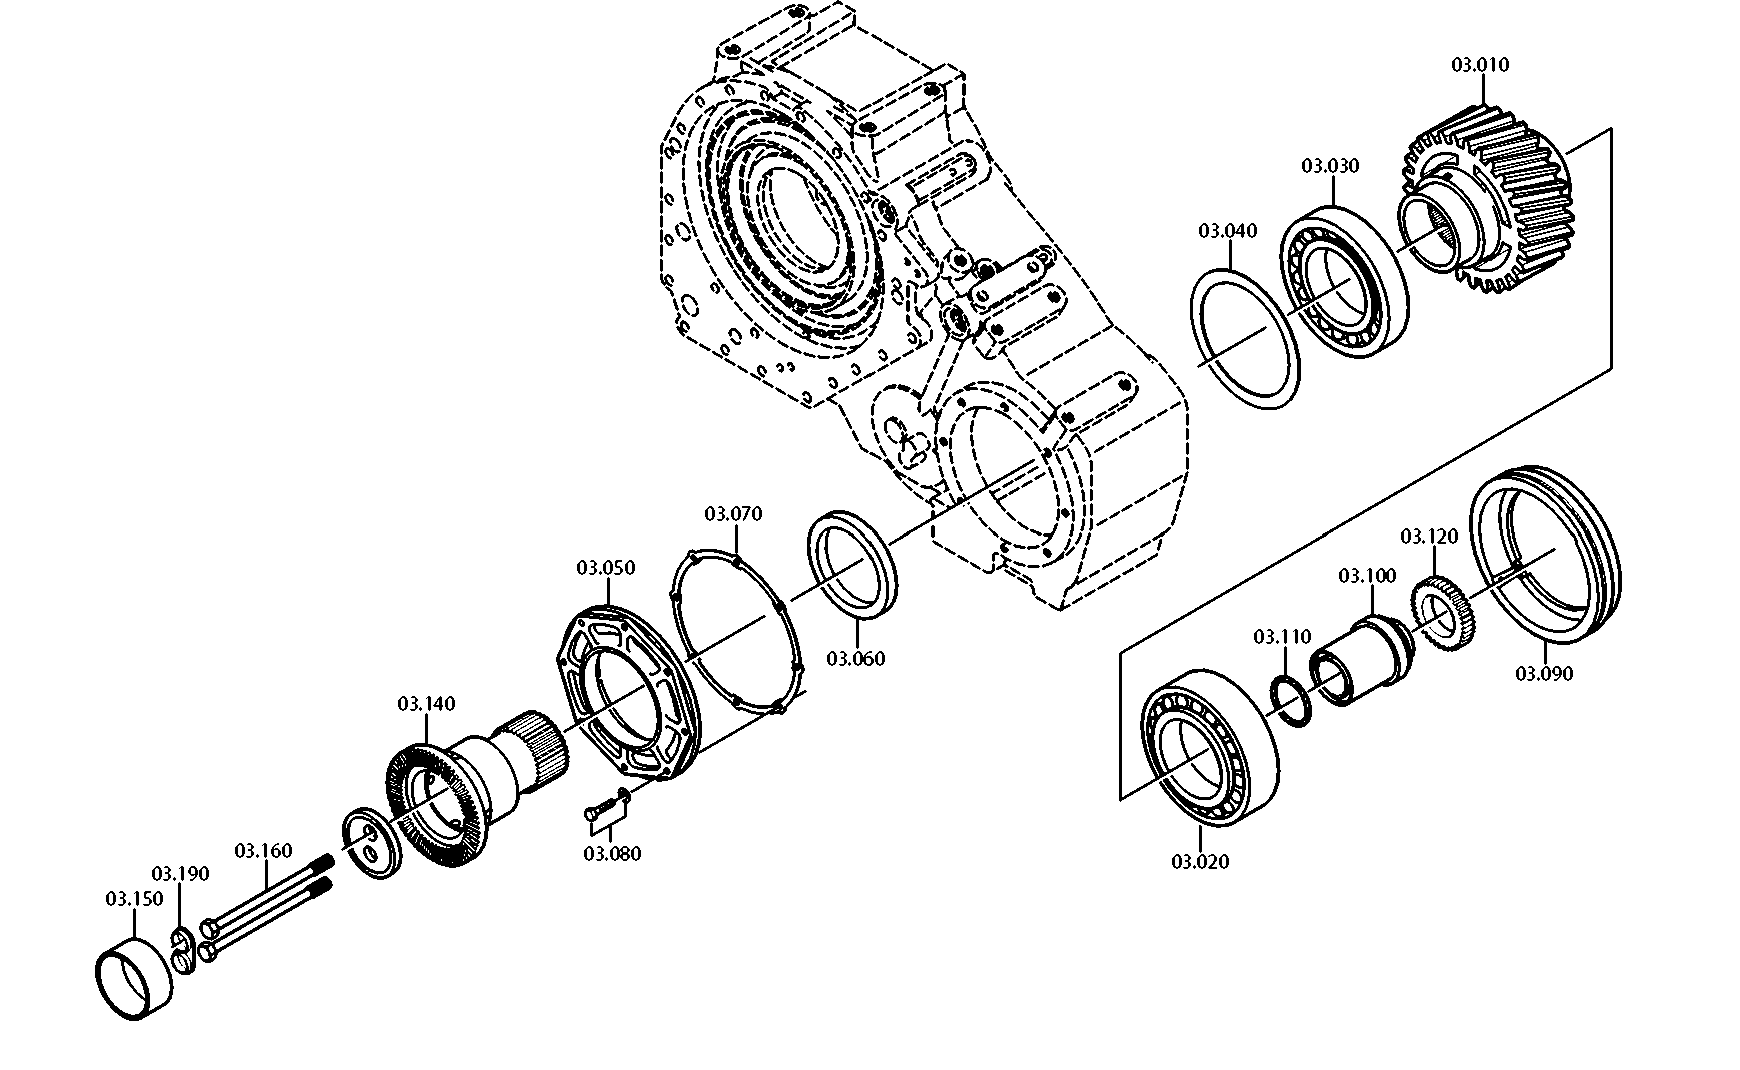 drawing for NOELL GMBH 140520691 - SHAFT SEAL (figure 1)